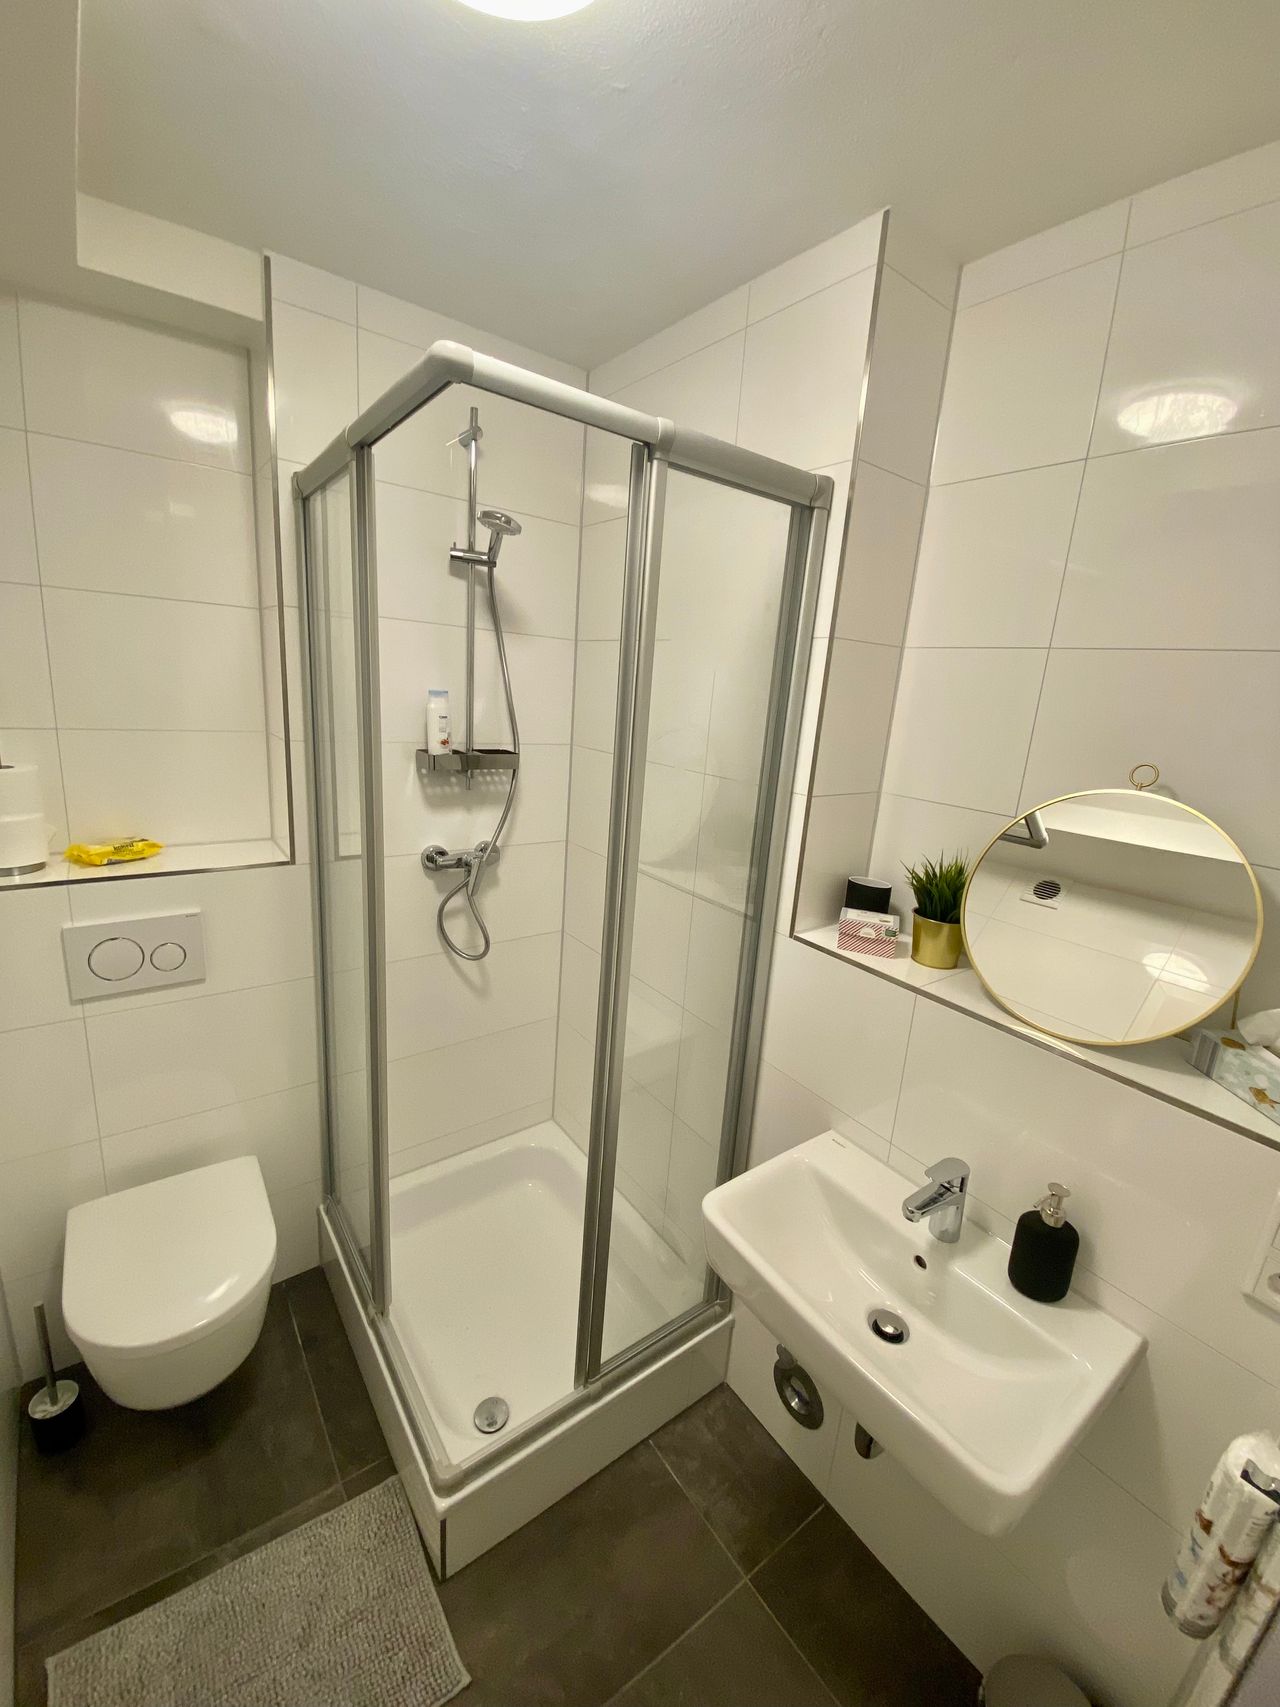 All-inclusive: Fully furnished apartment in Nuremberg city centre